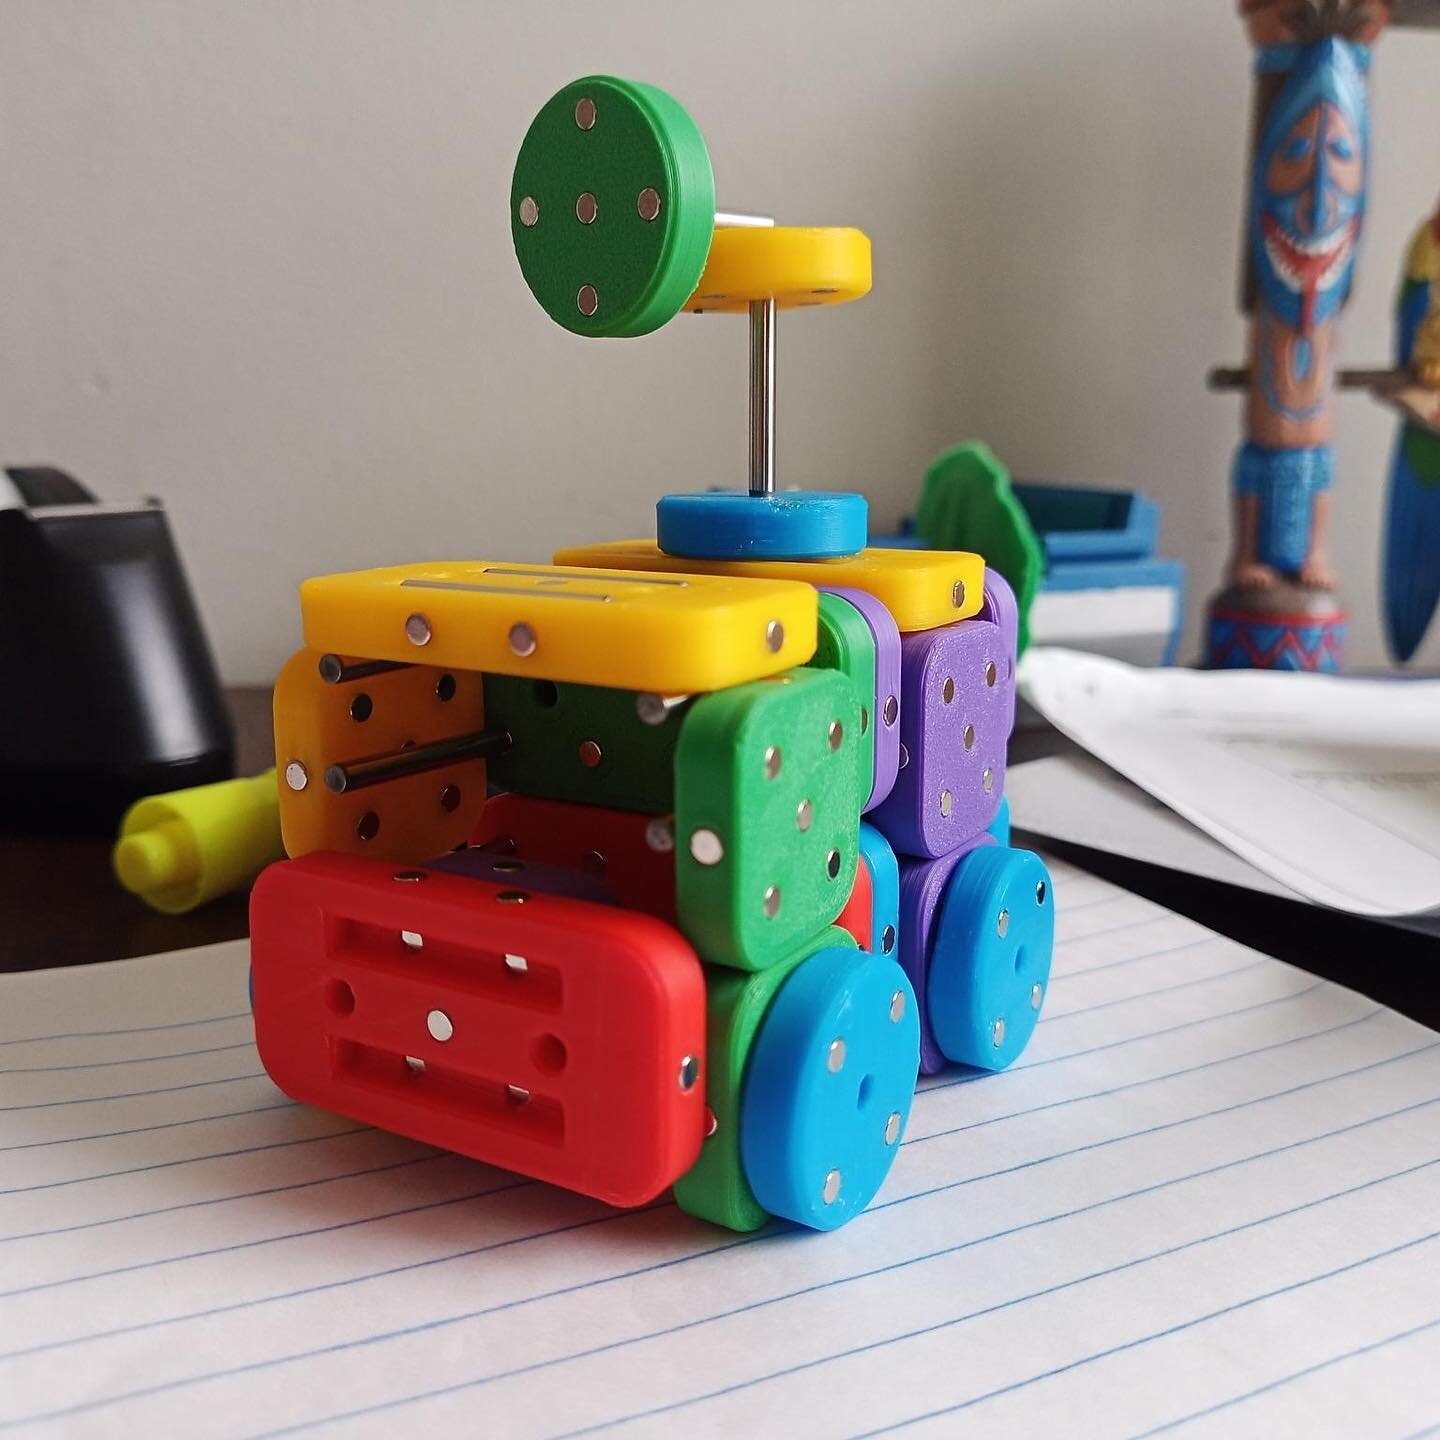 This creation was made by Grant. I love it. A car with a cool antenna on top!  #fidgettoys #stemtoys